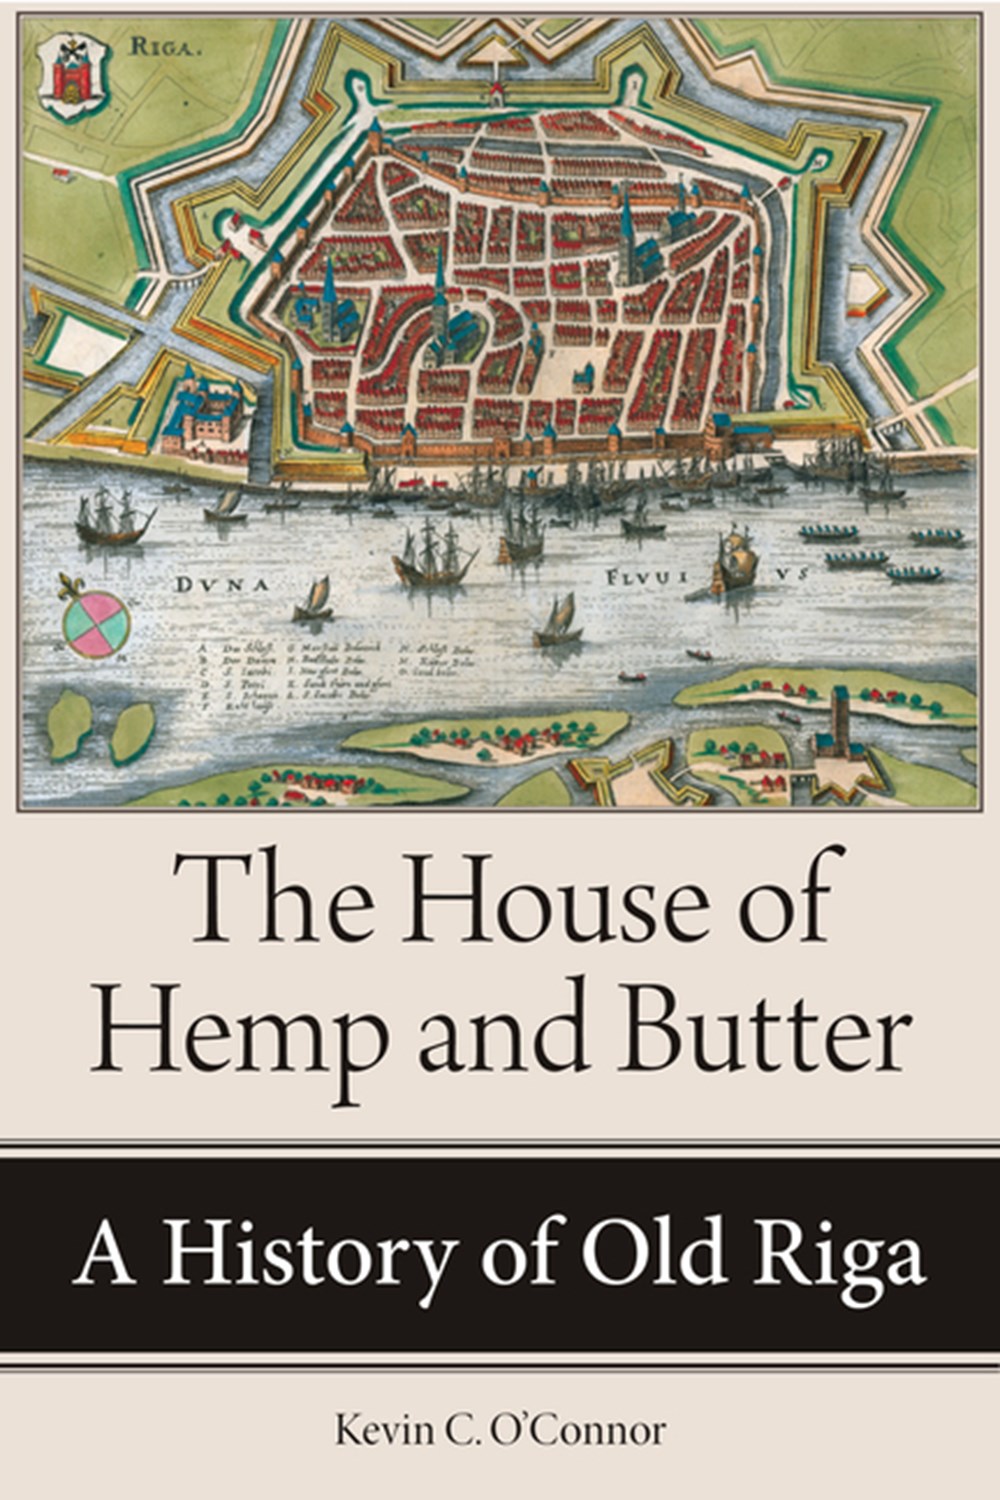 House of Hemp and Butter: A History of Old Riga